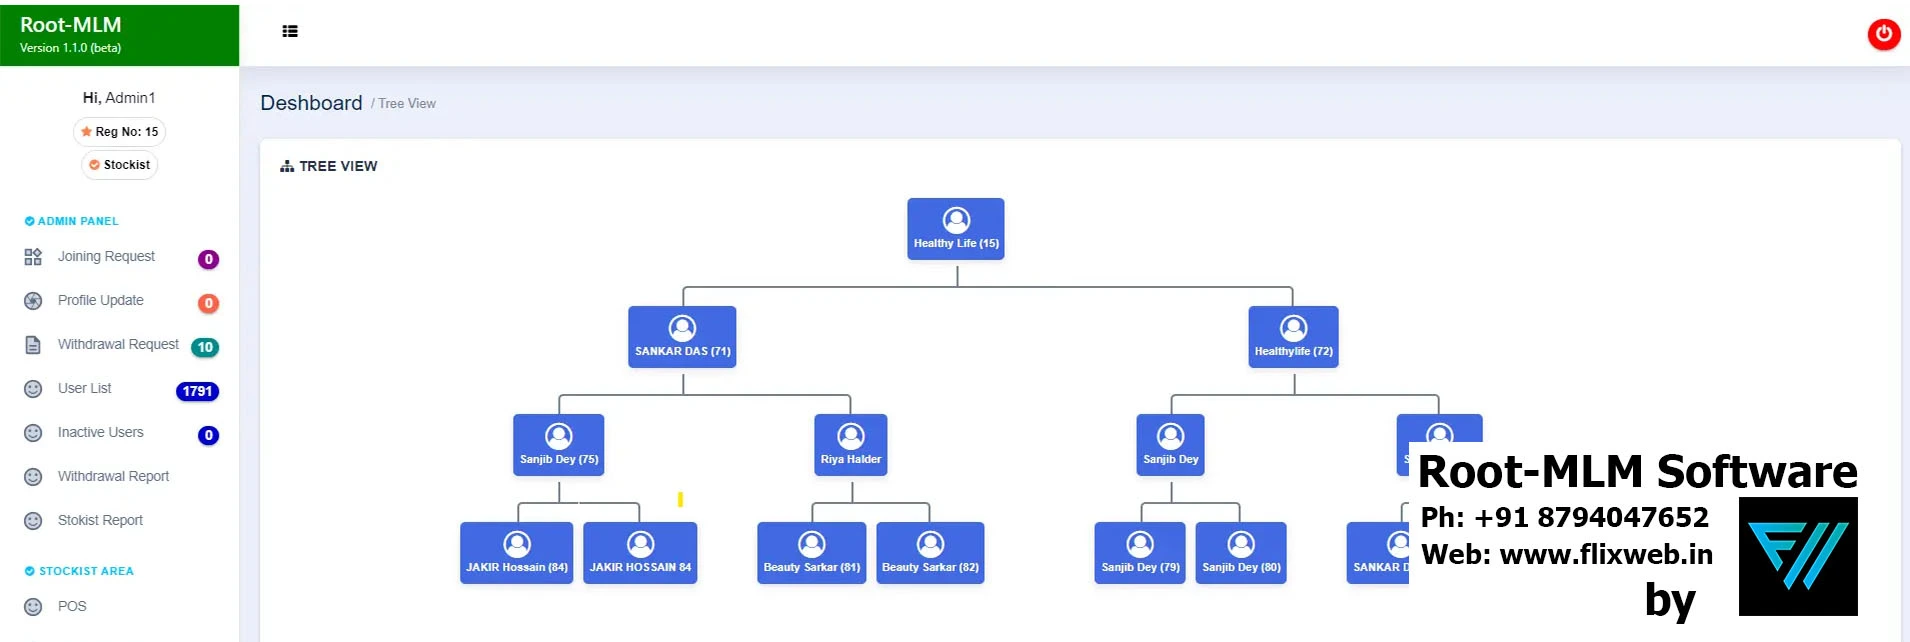 Root-MLM Software Tree view